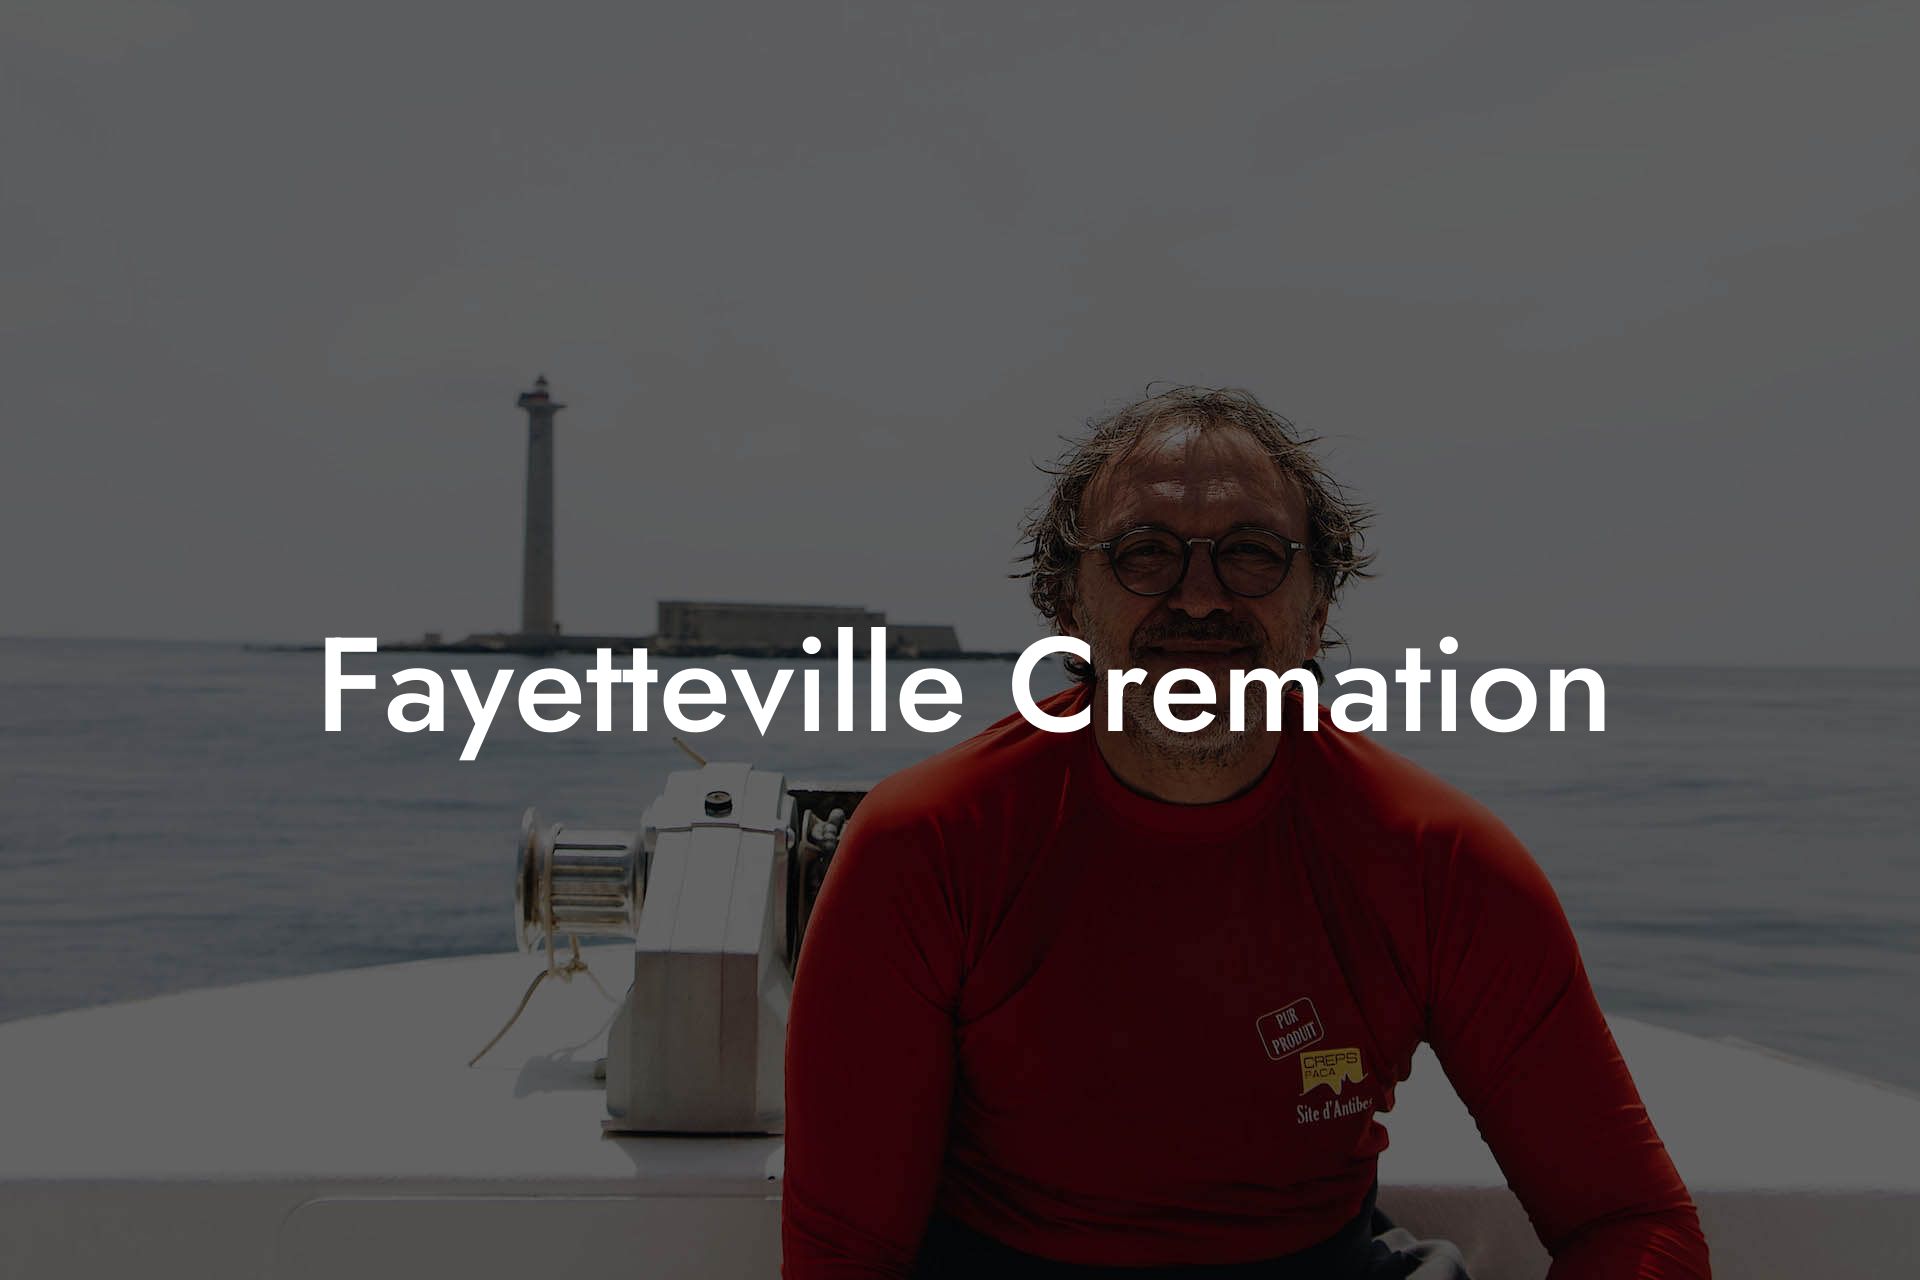 Fayetteville Cremation